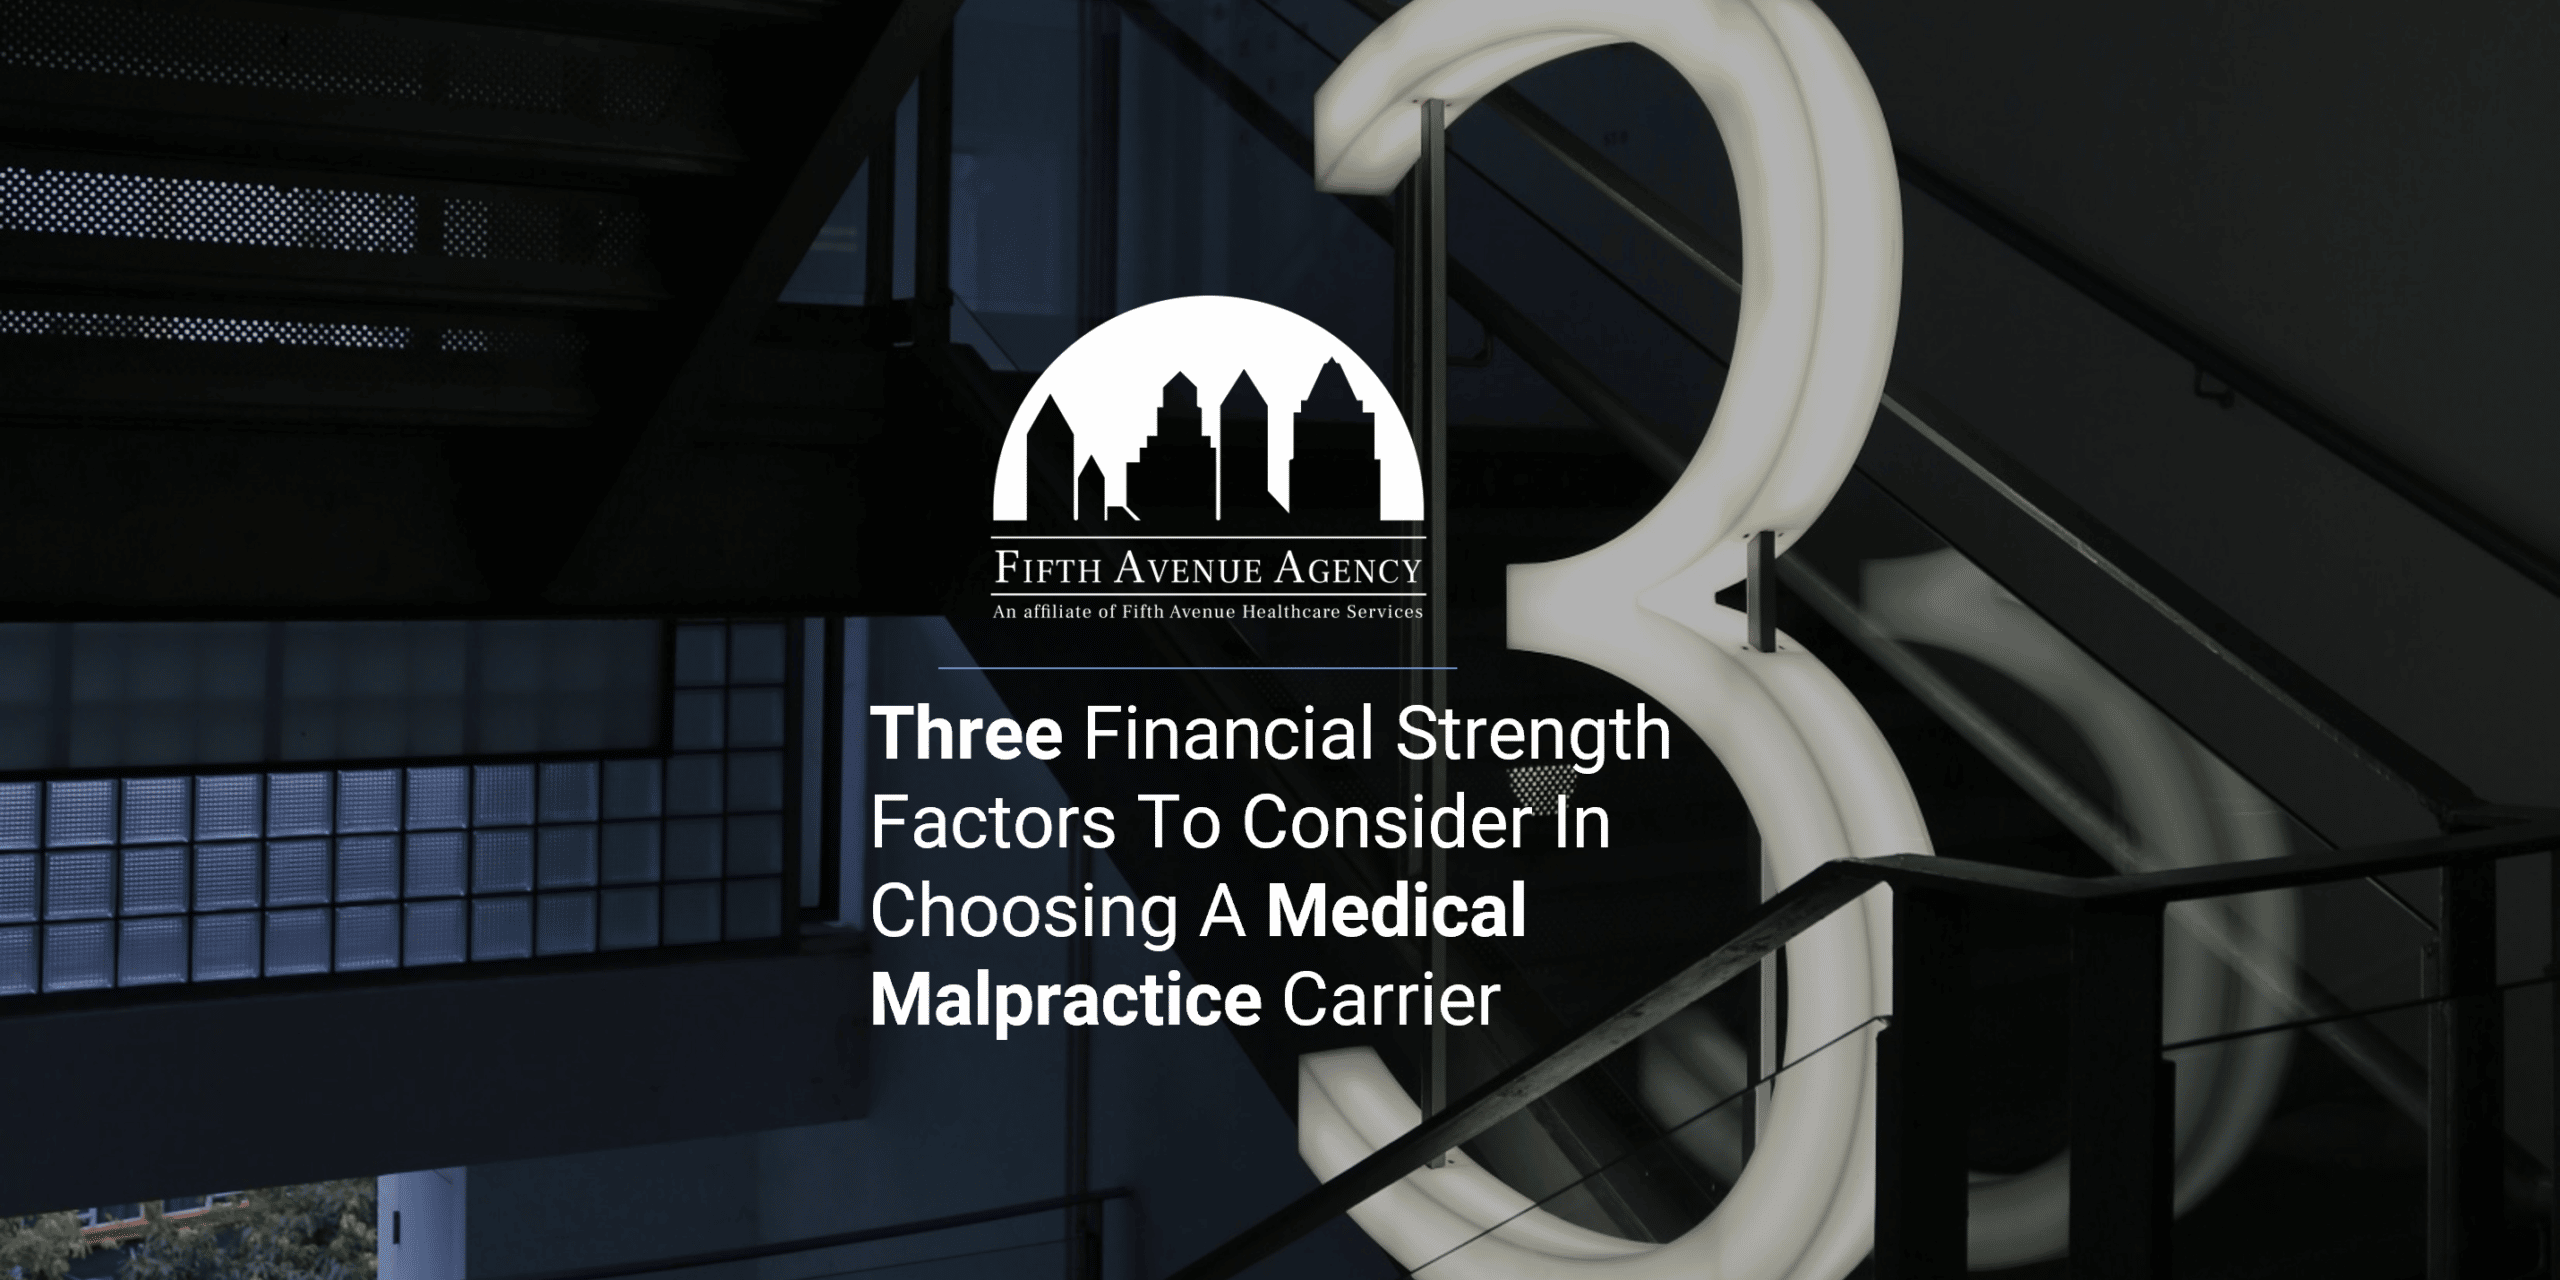 3 Financial Strength Factors Of A Medical Malpractice Carrier fifthavenueagency.com